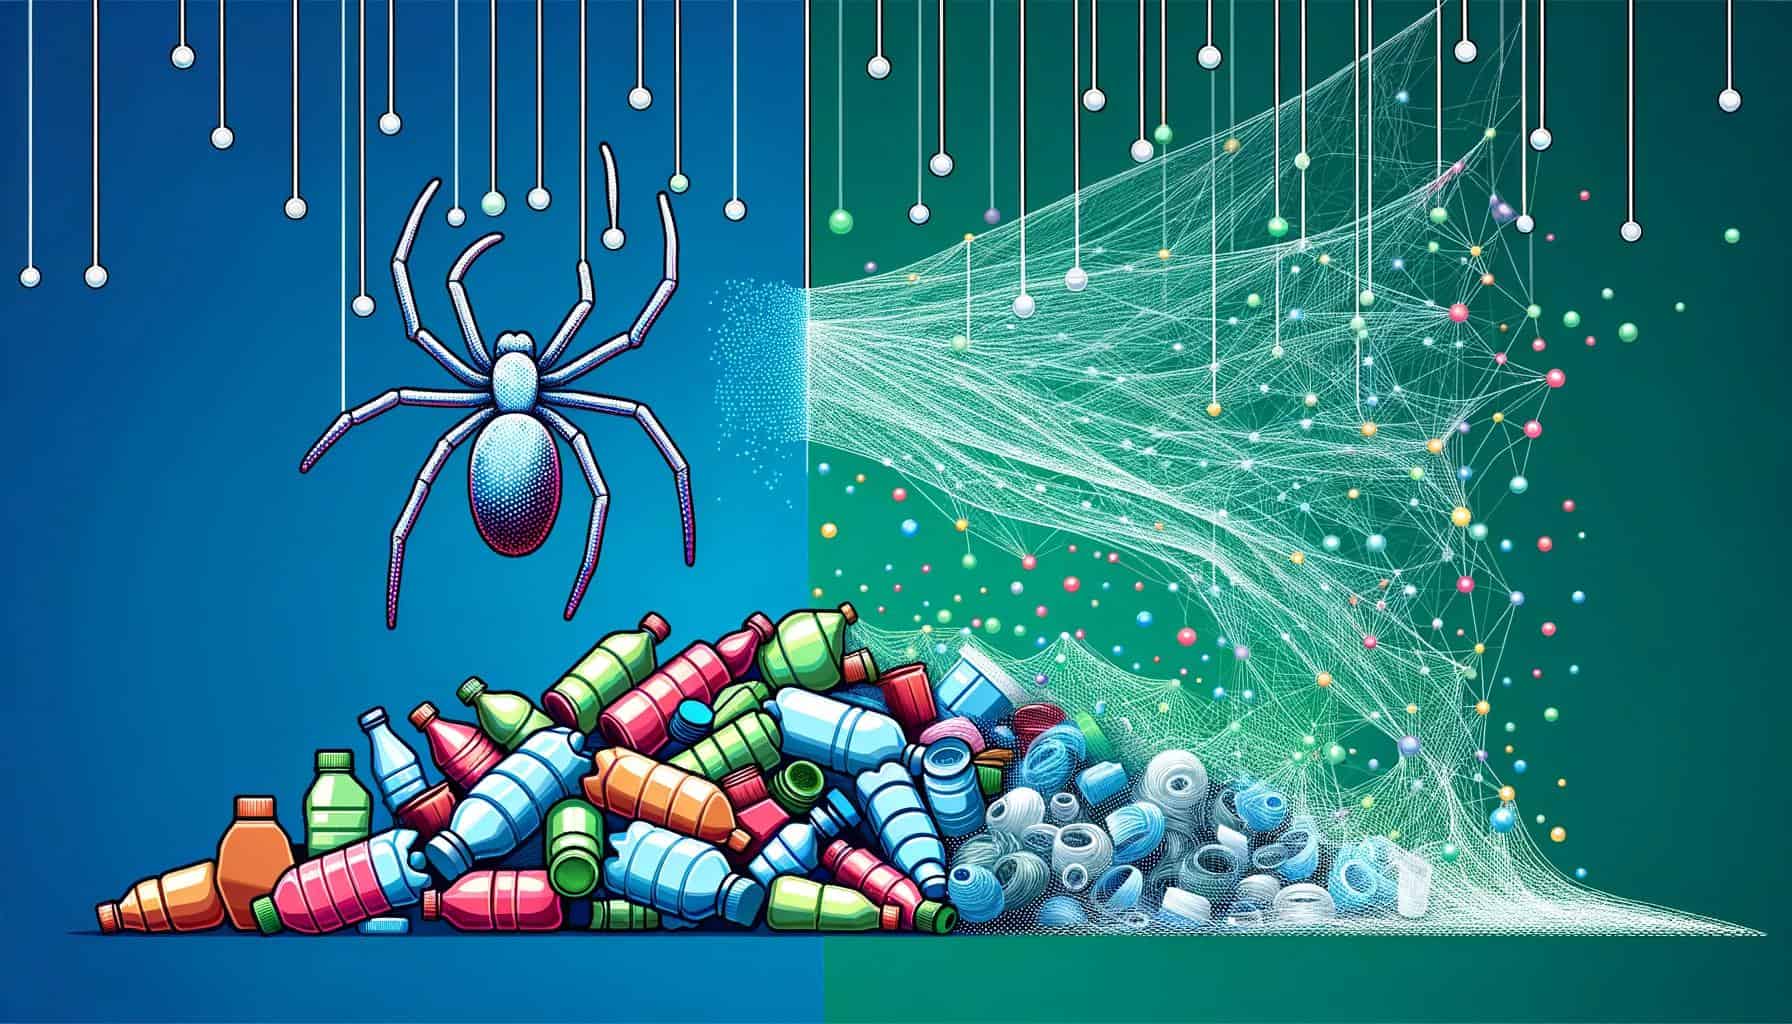 Bacteria turns plastic waste into spider silk